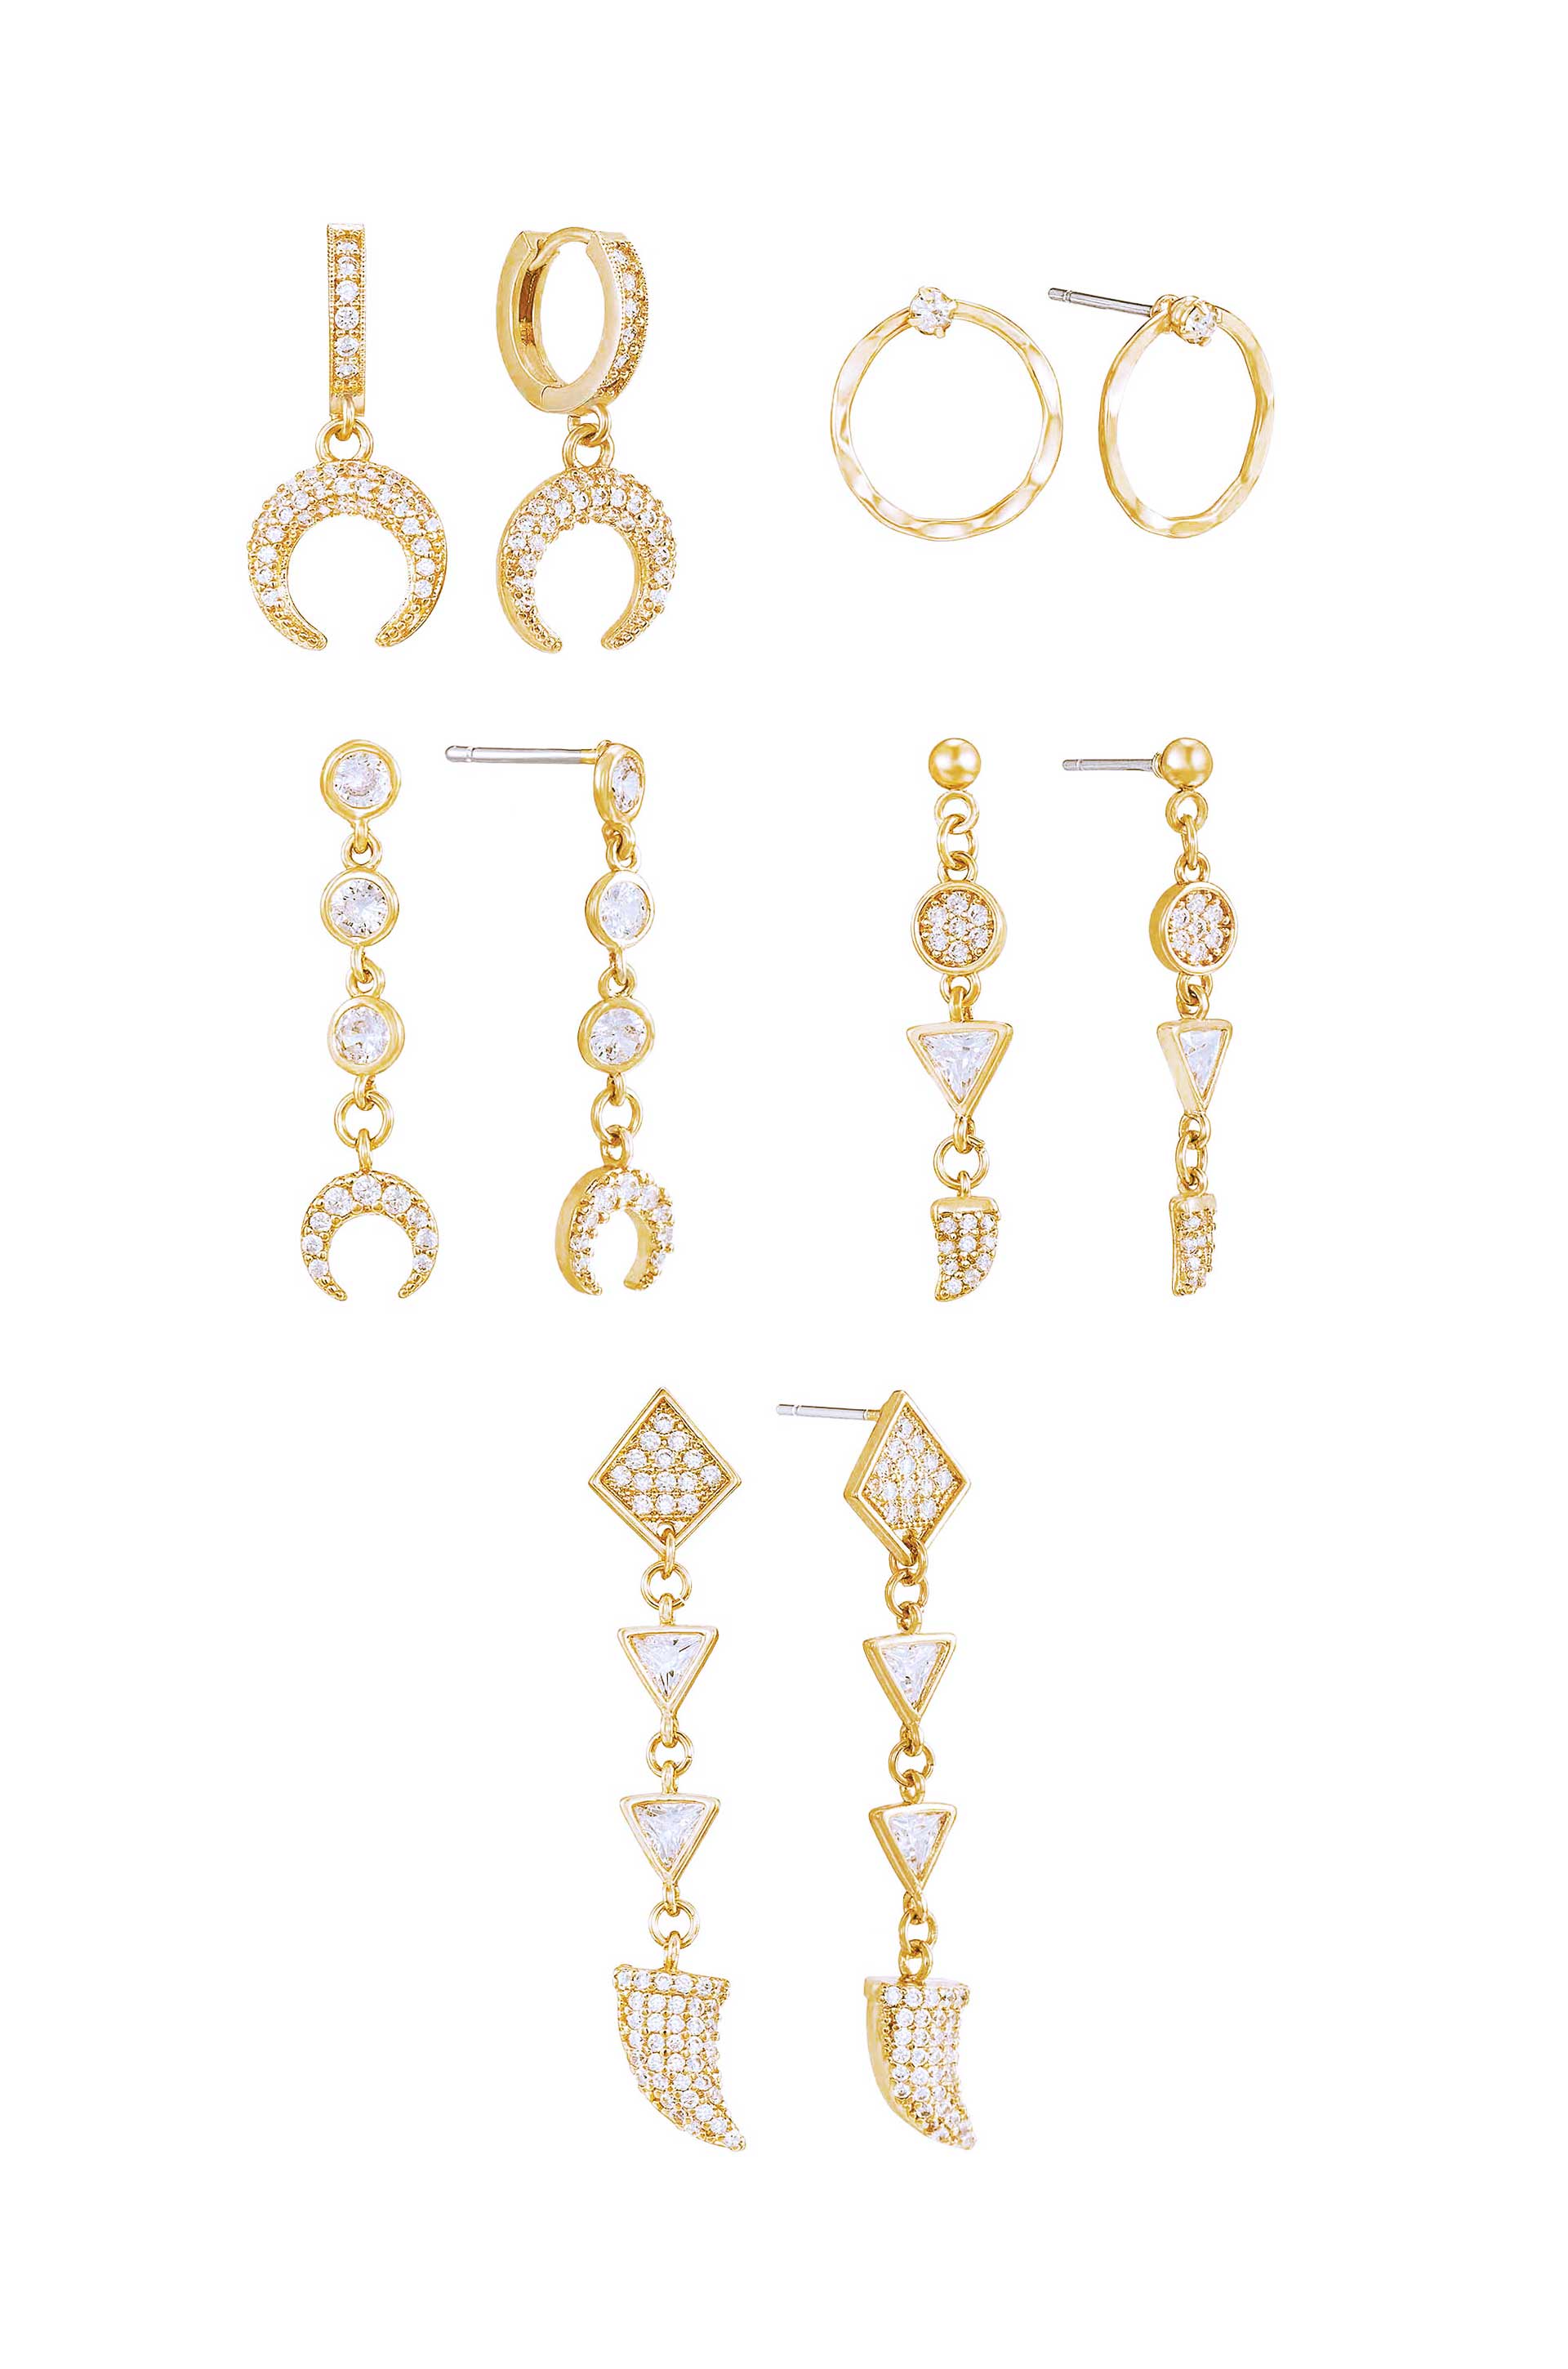 The Weekday Set and Crystal Earring Set of 5